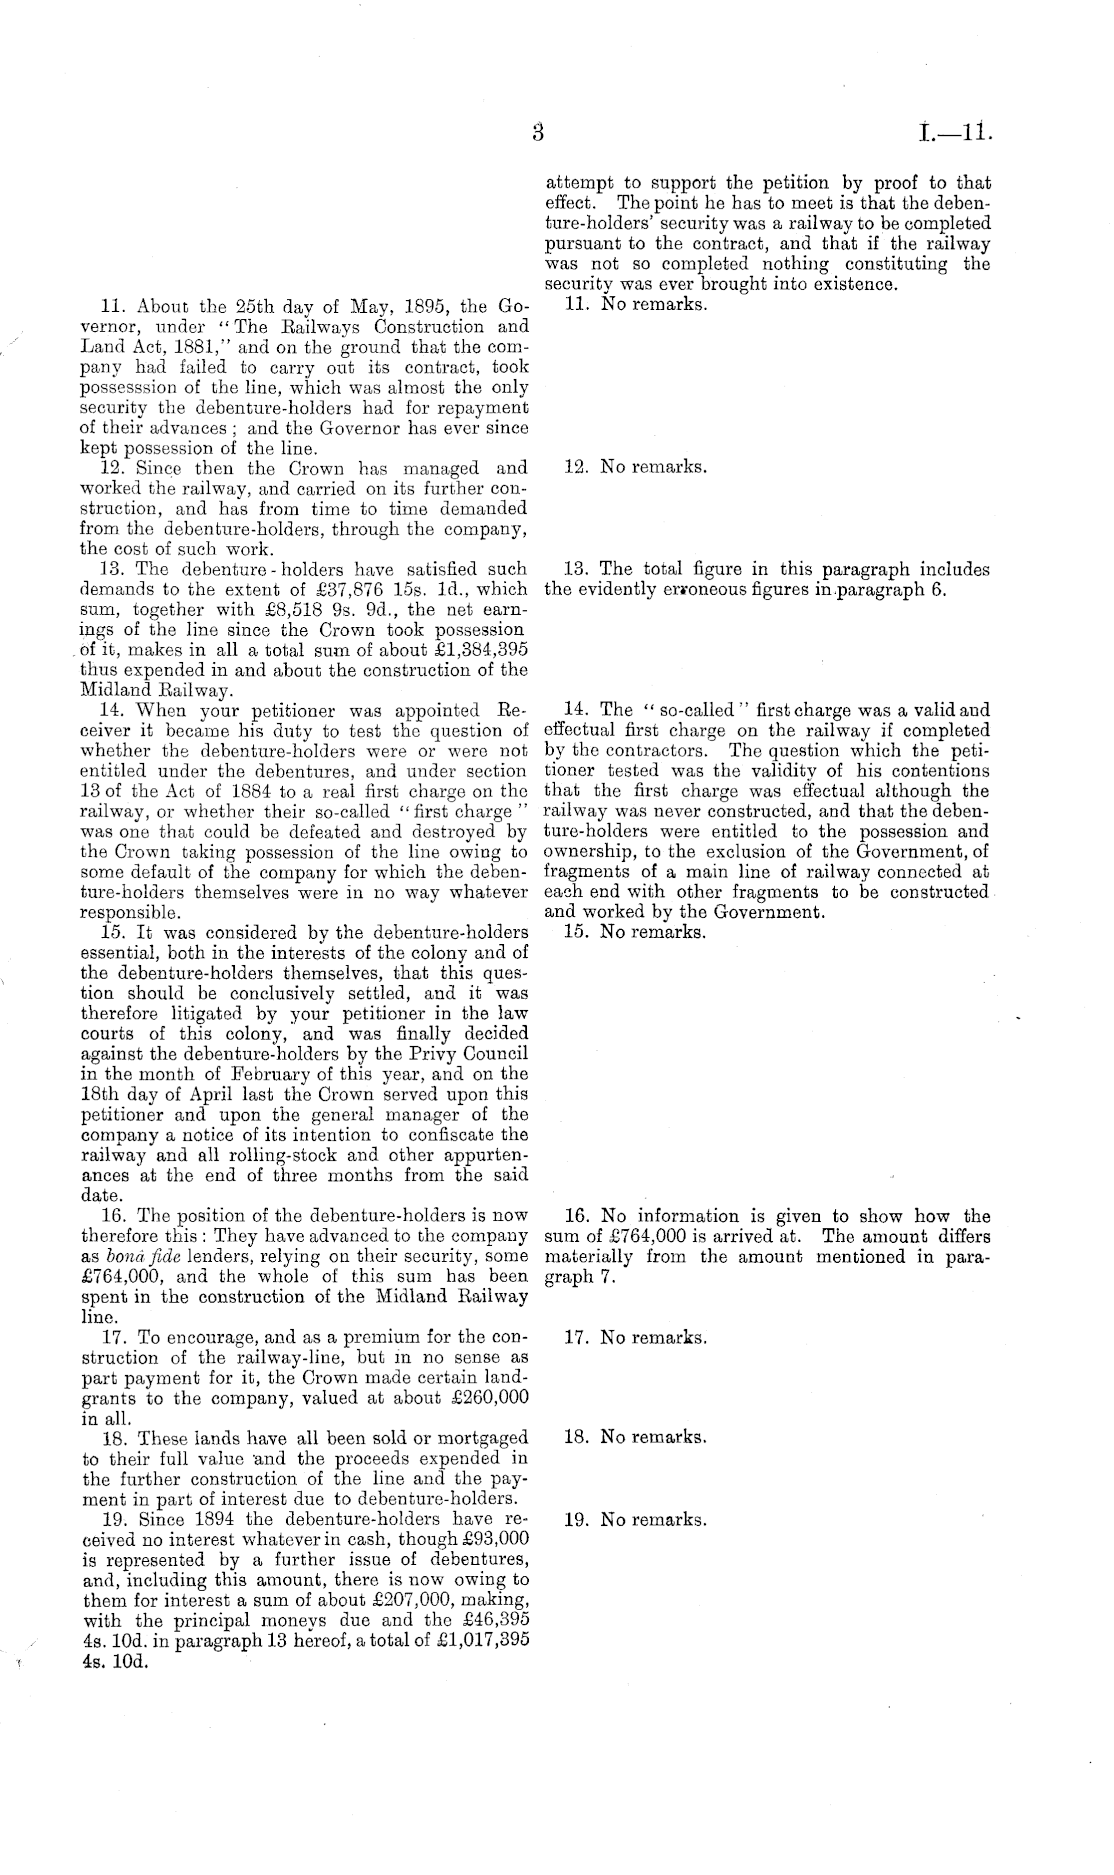 Papers Past, Parliamentary Papers, Appendix to the Journals of the House  of Representatives, 1900 Session I